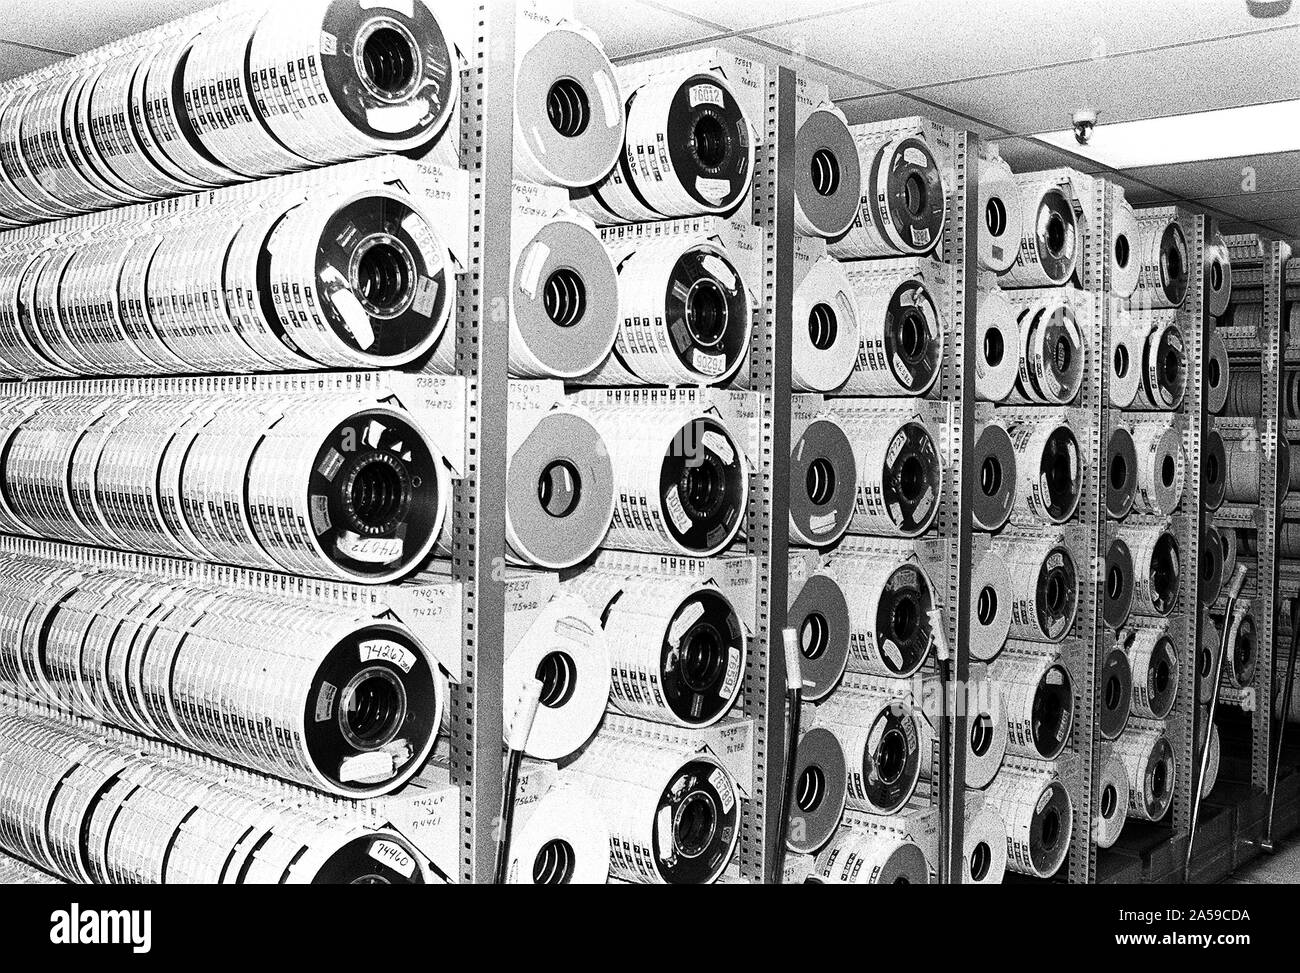 magnetic-tape-reels-containing-30-million-characters-a-piece-line-shelves-in-the-electronic-data-center-of-the-naval-computer-and-telecommunications-station-2A59CDA.jpg